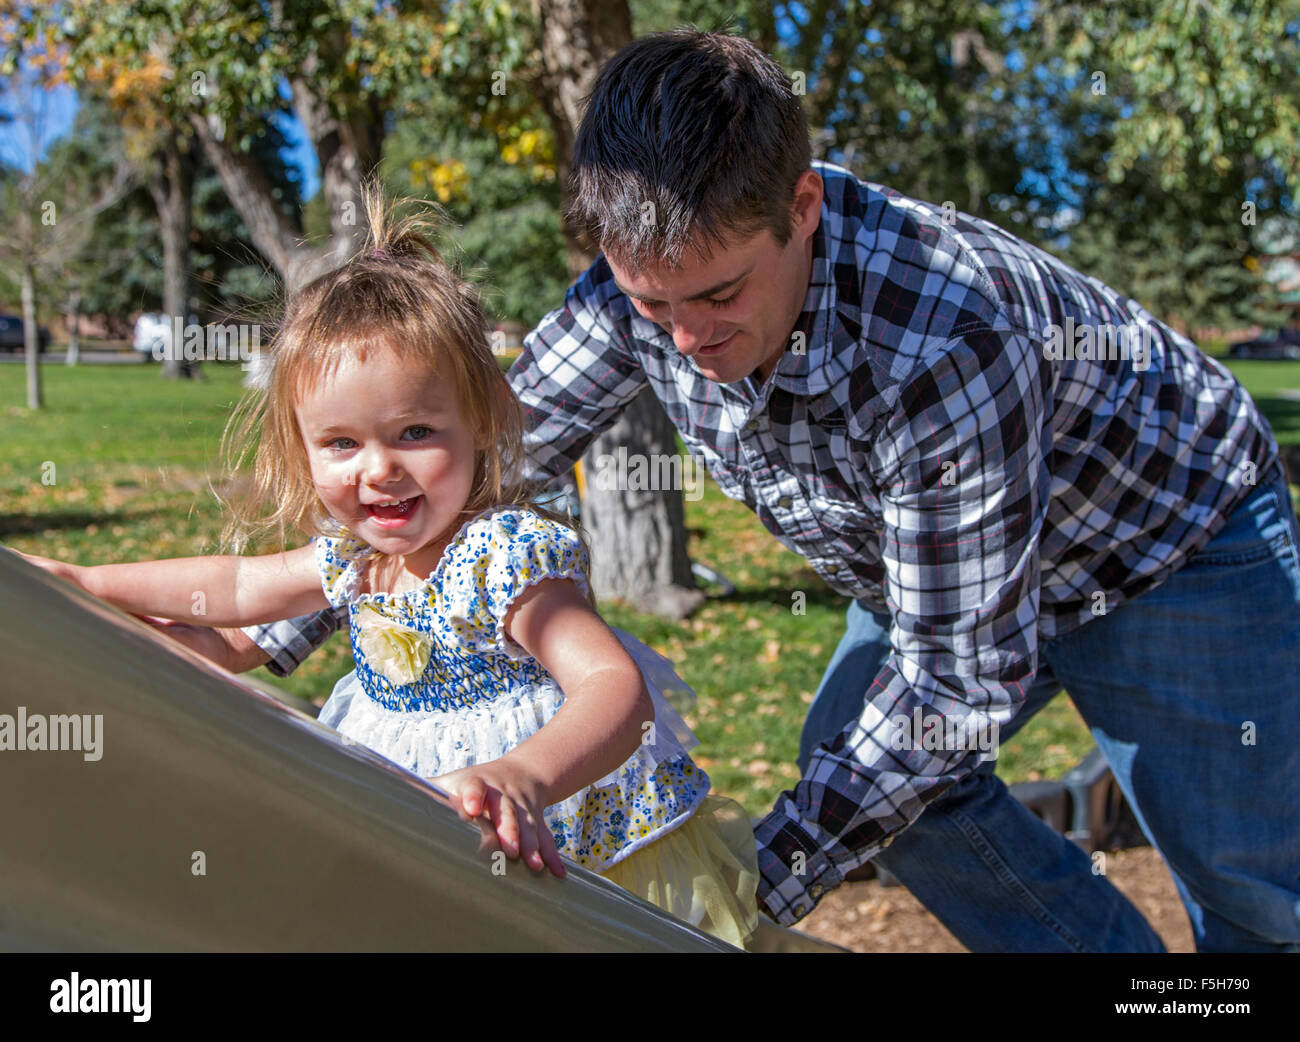 Father and young daughter playing on a sliding board, park playground Stock Photo